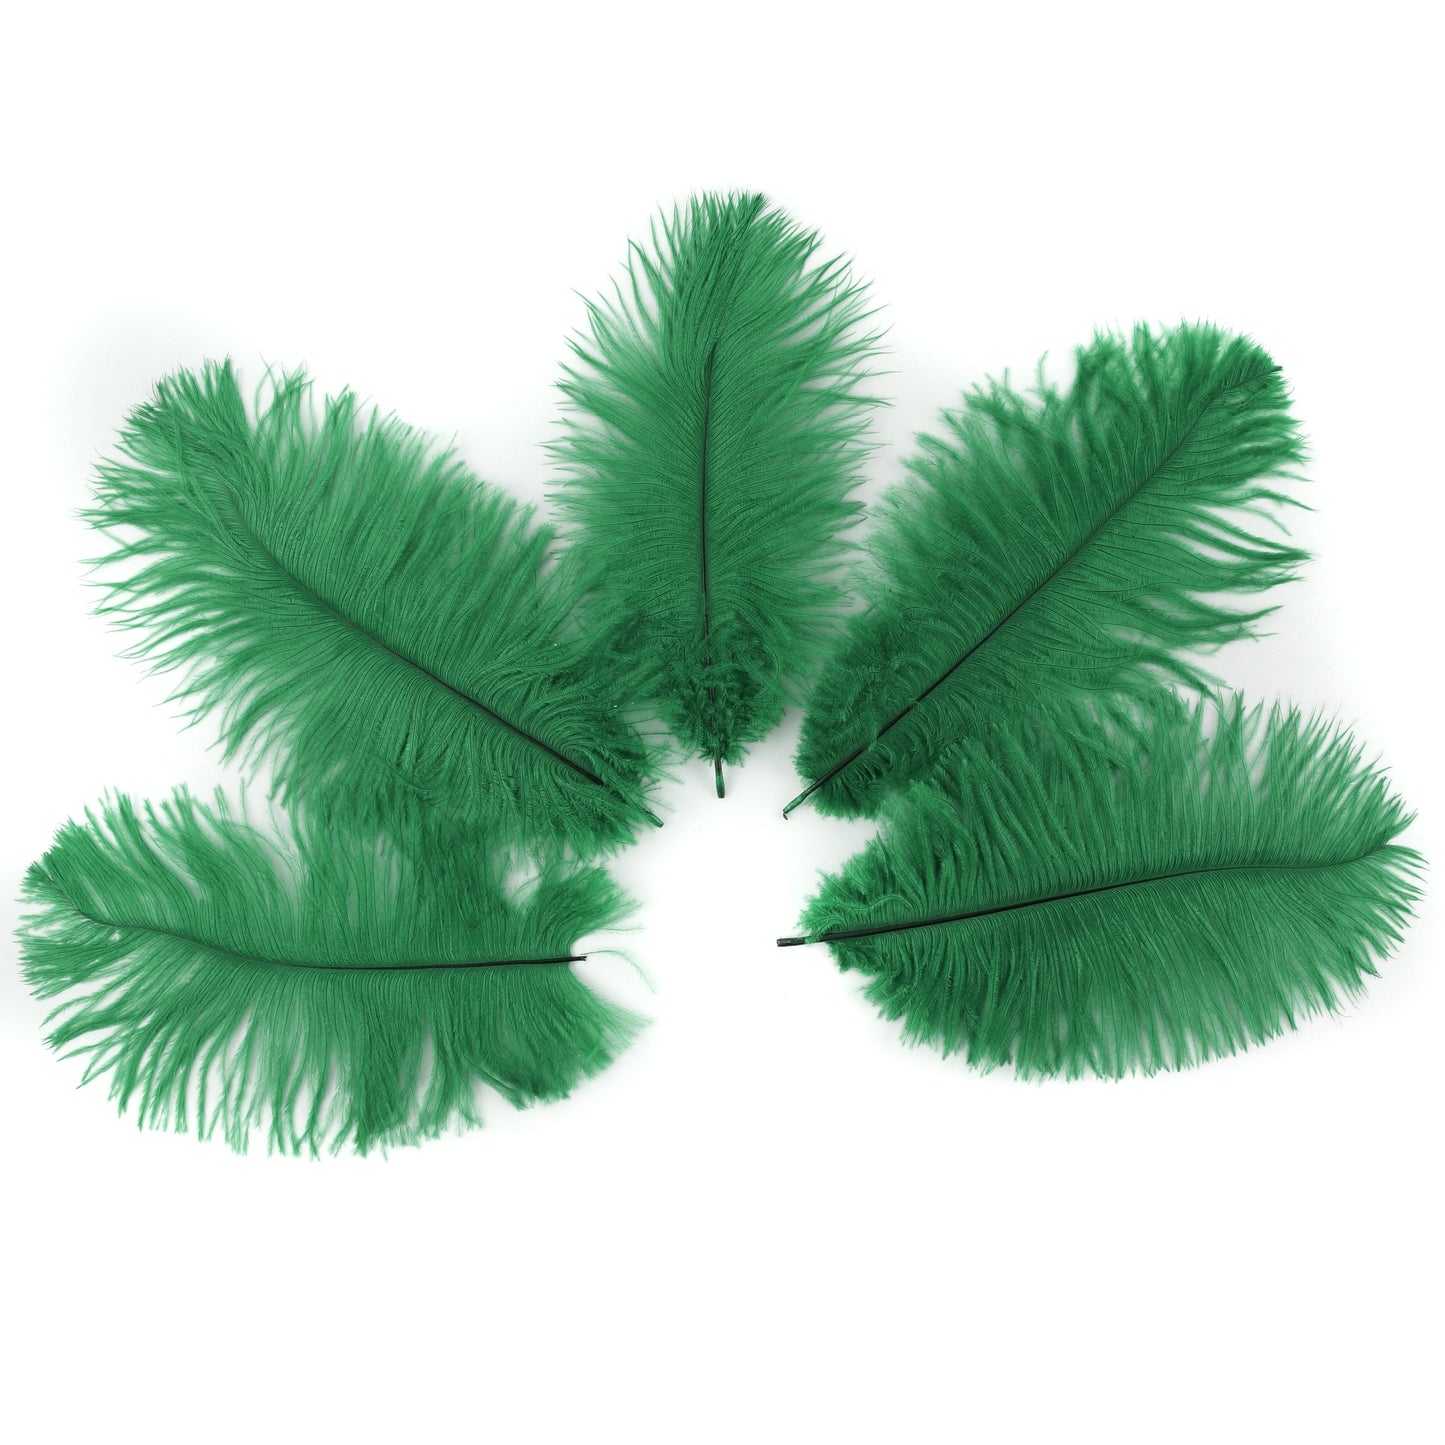 Ostrich Feathers 4-8" Drabs - Emerald